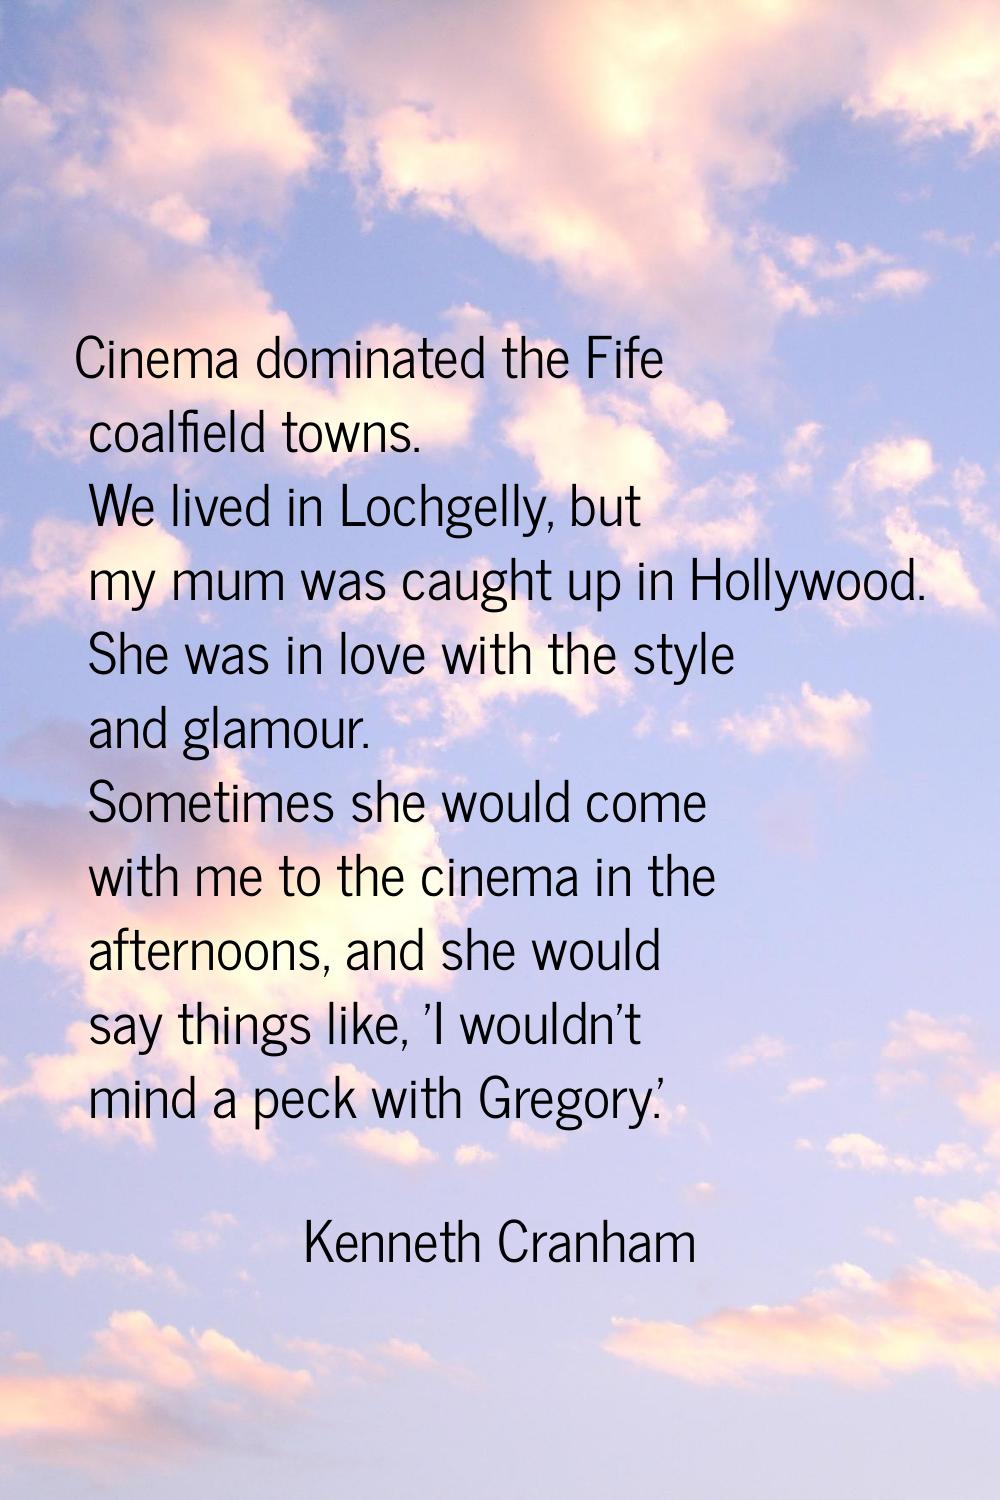 Cinema dominated the Fife coalfield towns. We lived in Lochgelly, but my mum was caught up in Holly